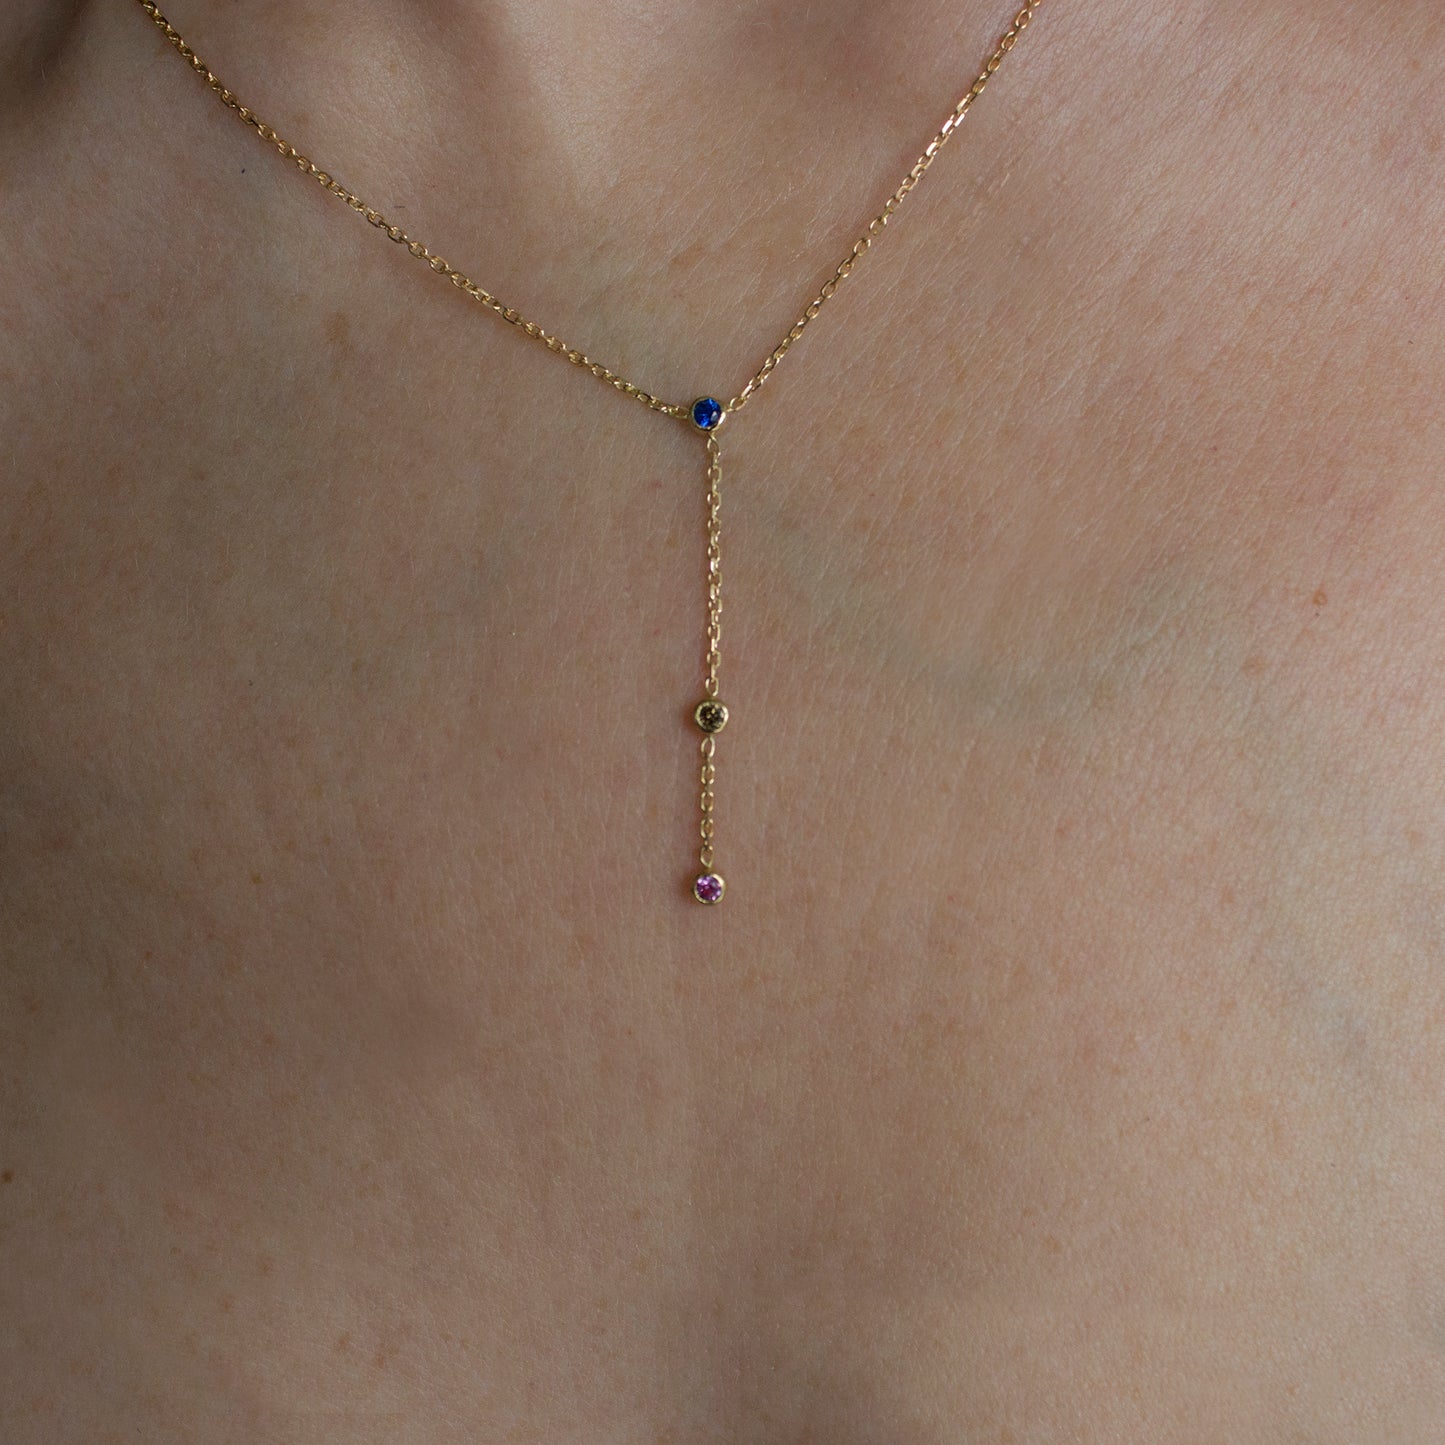 DEWY DROP NECKLACE - BROWN DIAMOND, BLUE AND PINK SAPPHIRES - Irena Chmura Jewellery